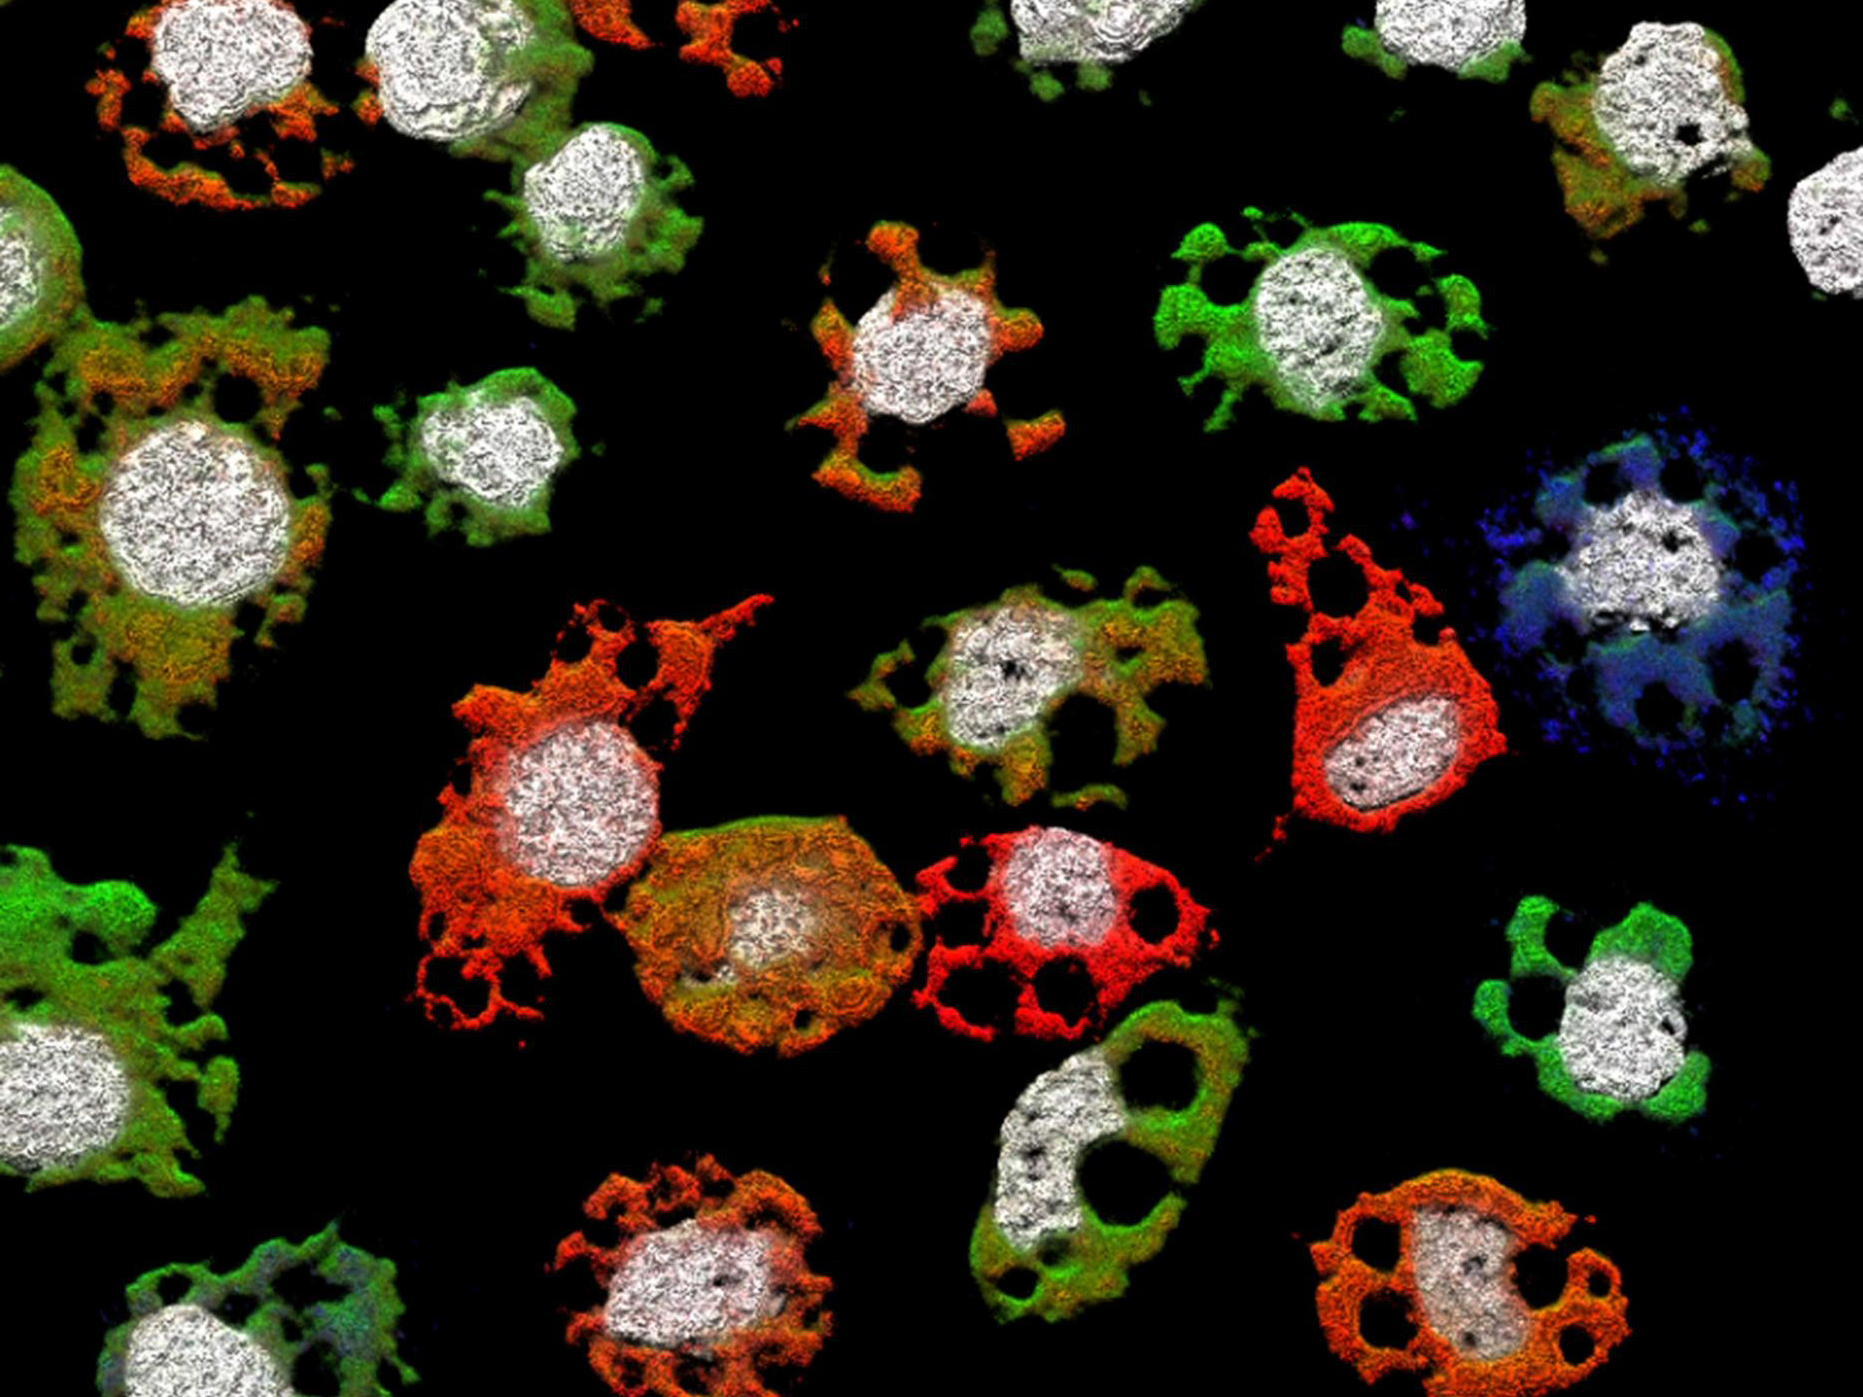 These are insect cells infected with the Guaico Culex virus. The different colors denote cells infected with different pieces of the virus. Only the brown-colored cells are infectious because they contain the complete virus. (Image by Michael Lindquist/Cell Press)